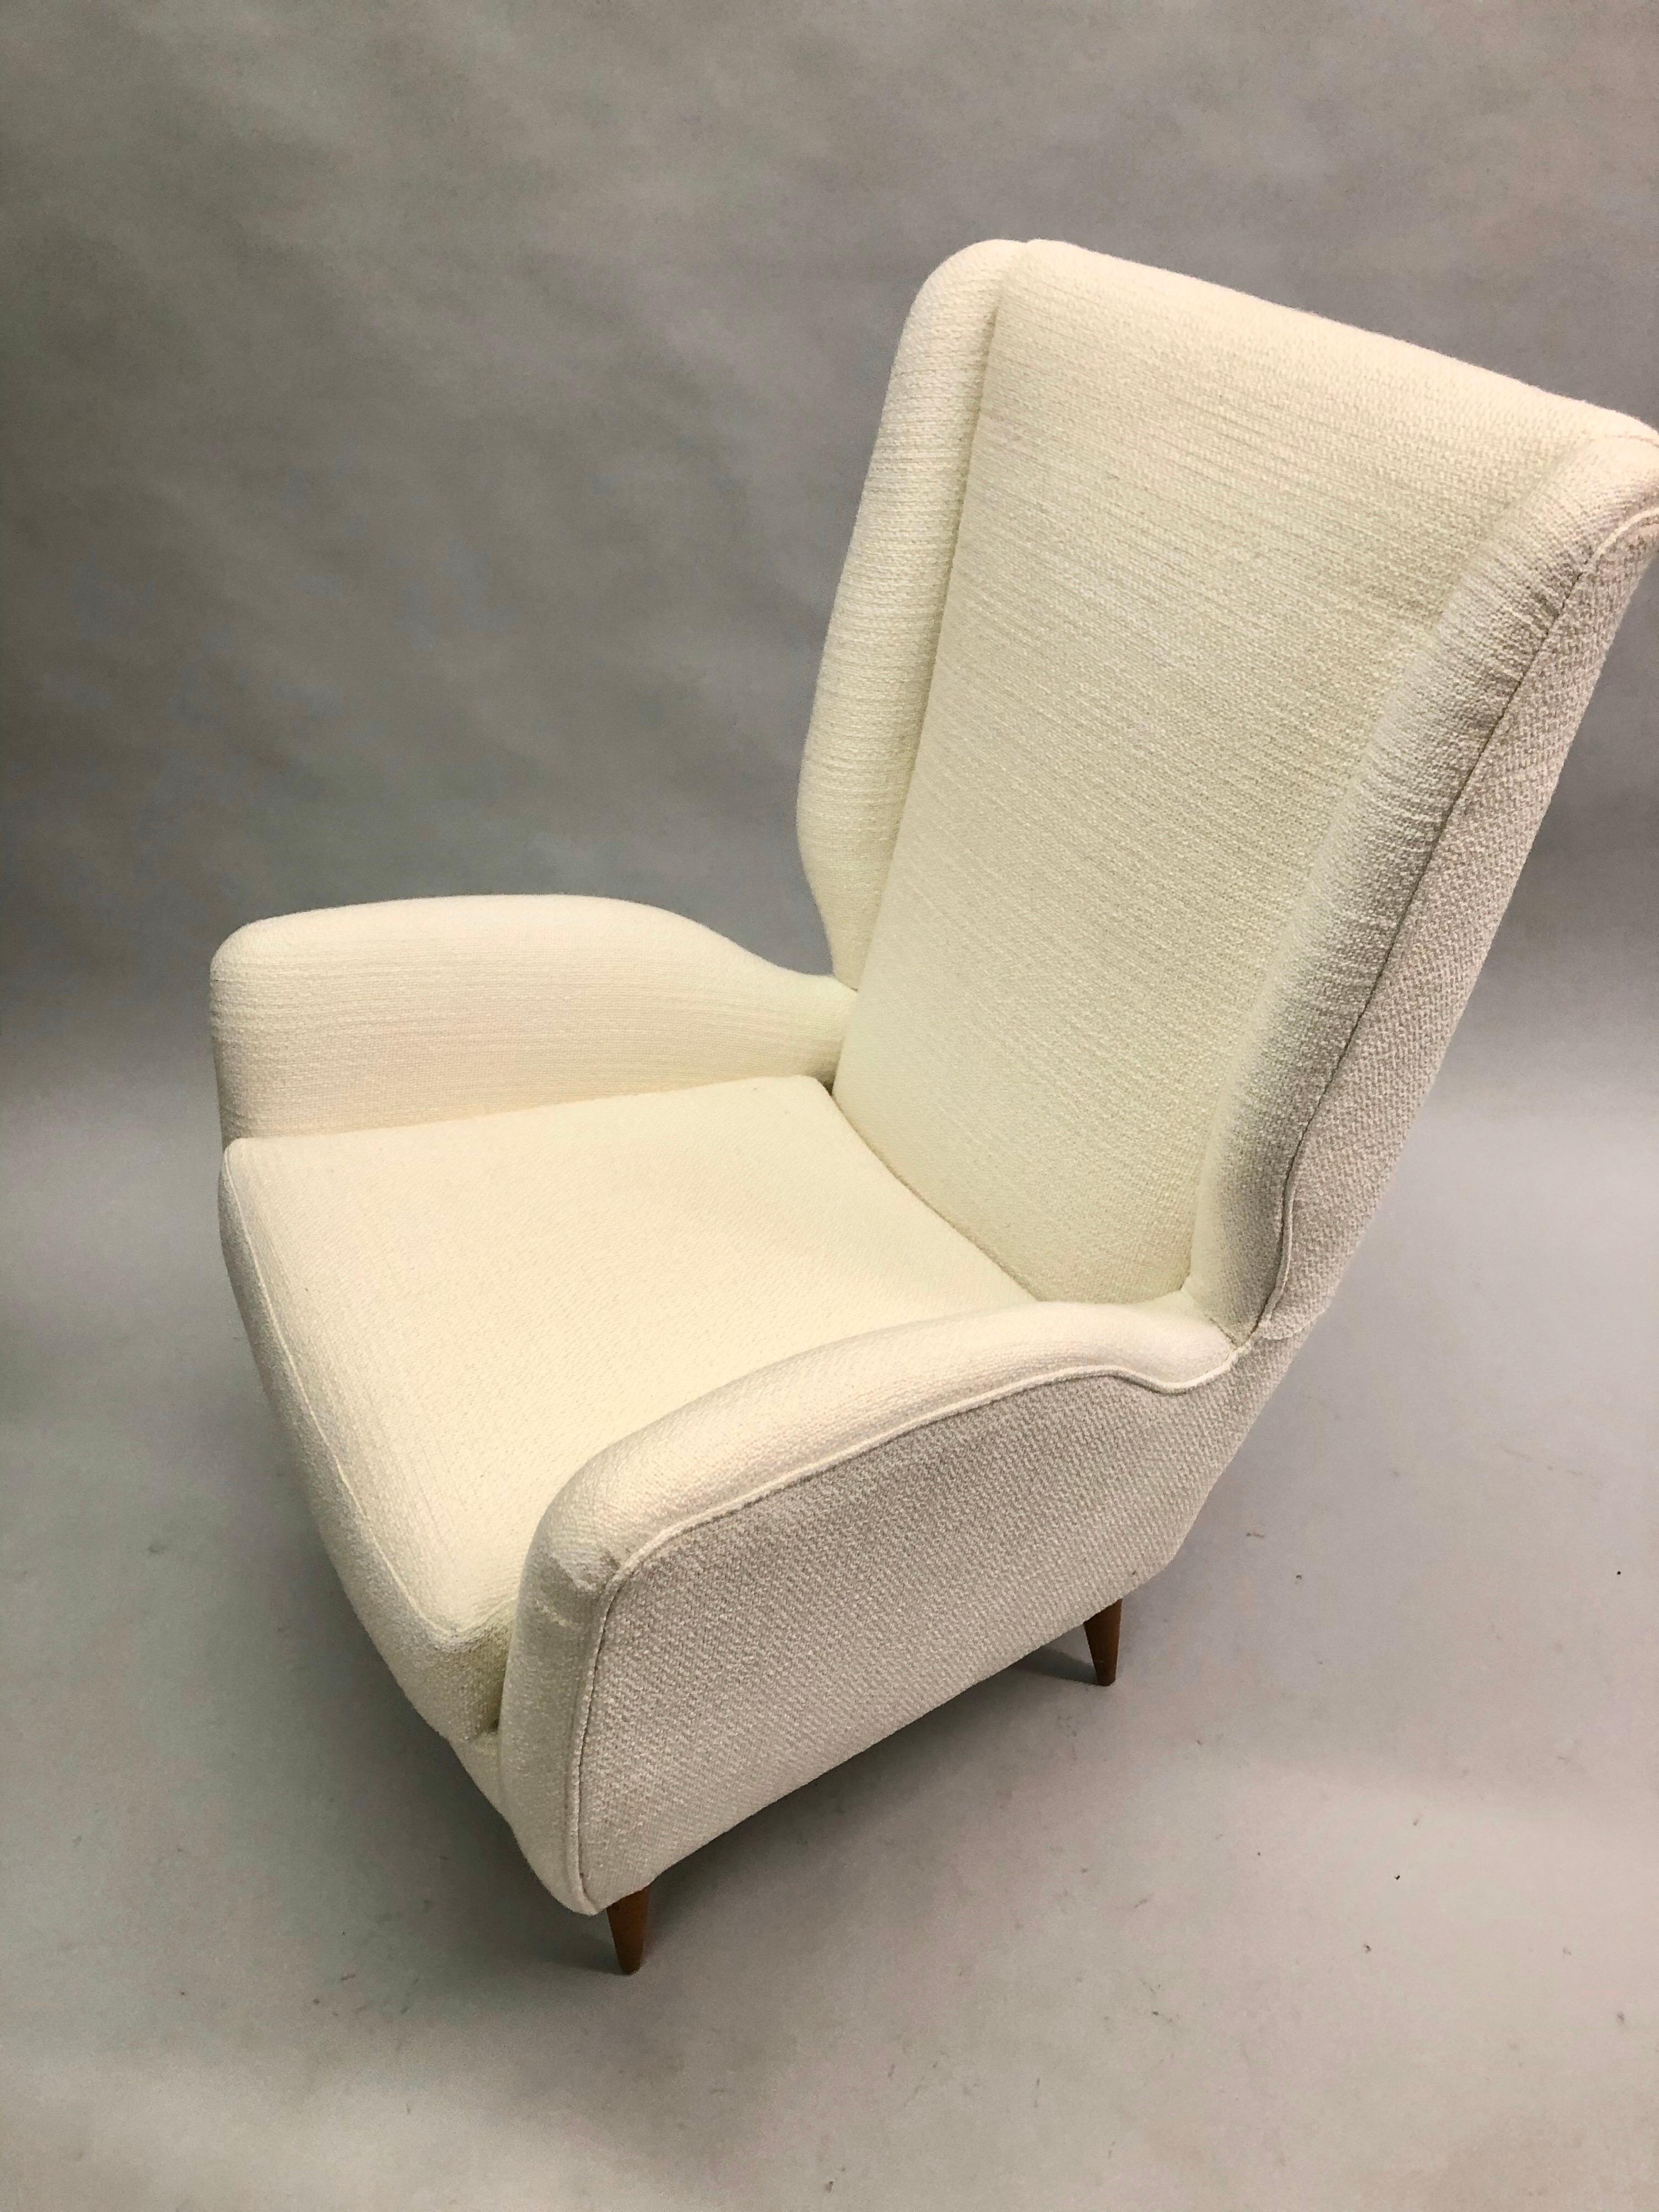 Pair of Italian Wingback Lounge Chairs / Armchairs by Gio Ponti, Model 512 3